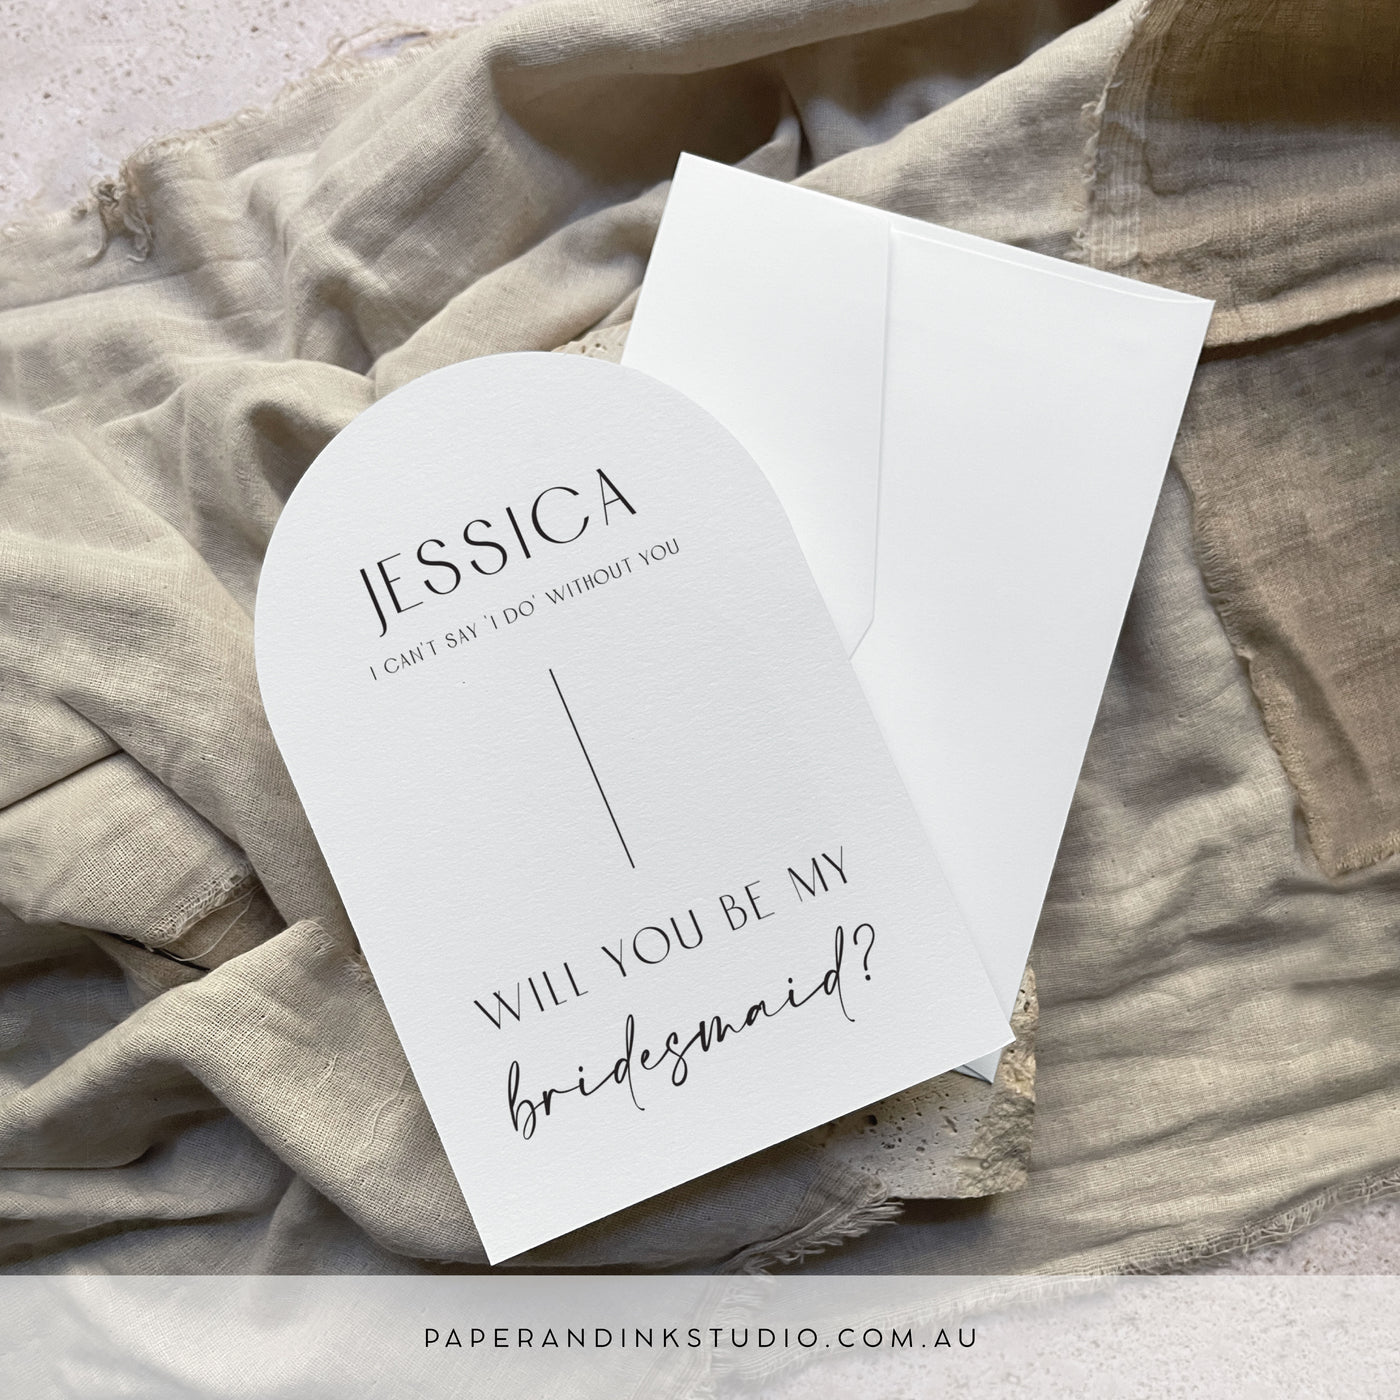 A flat white arch shaped card that can be personalised with the receiver's name, to thank them for being a part of of the couple's wedding party. This one says will you be my bridesmaid.